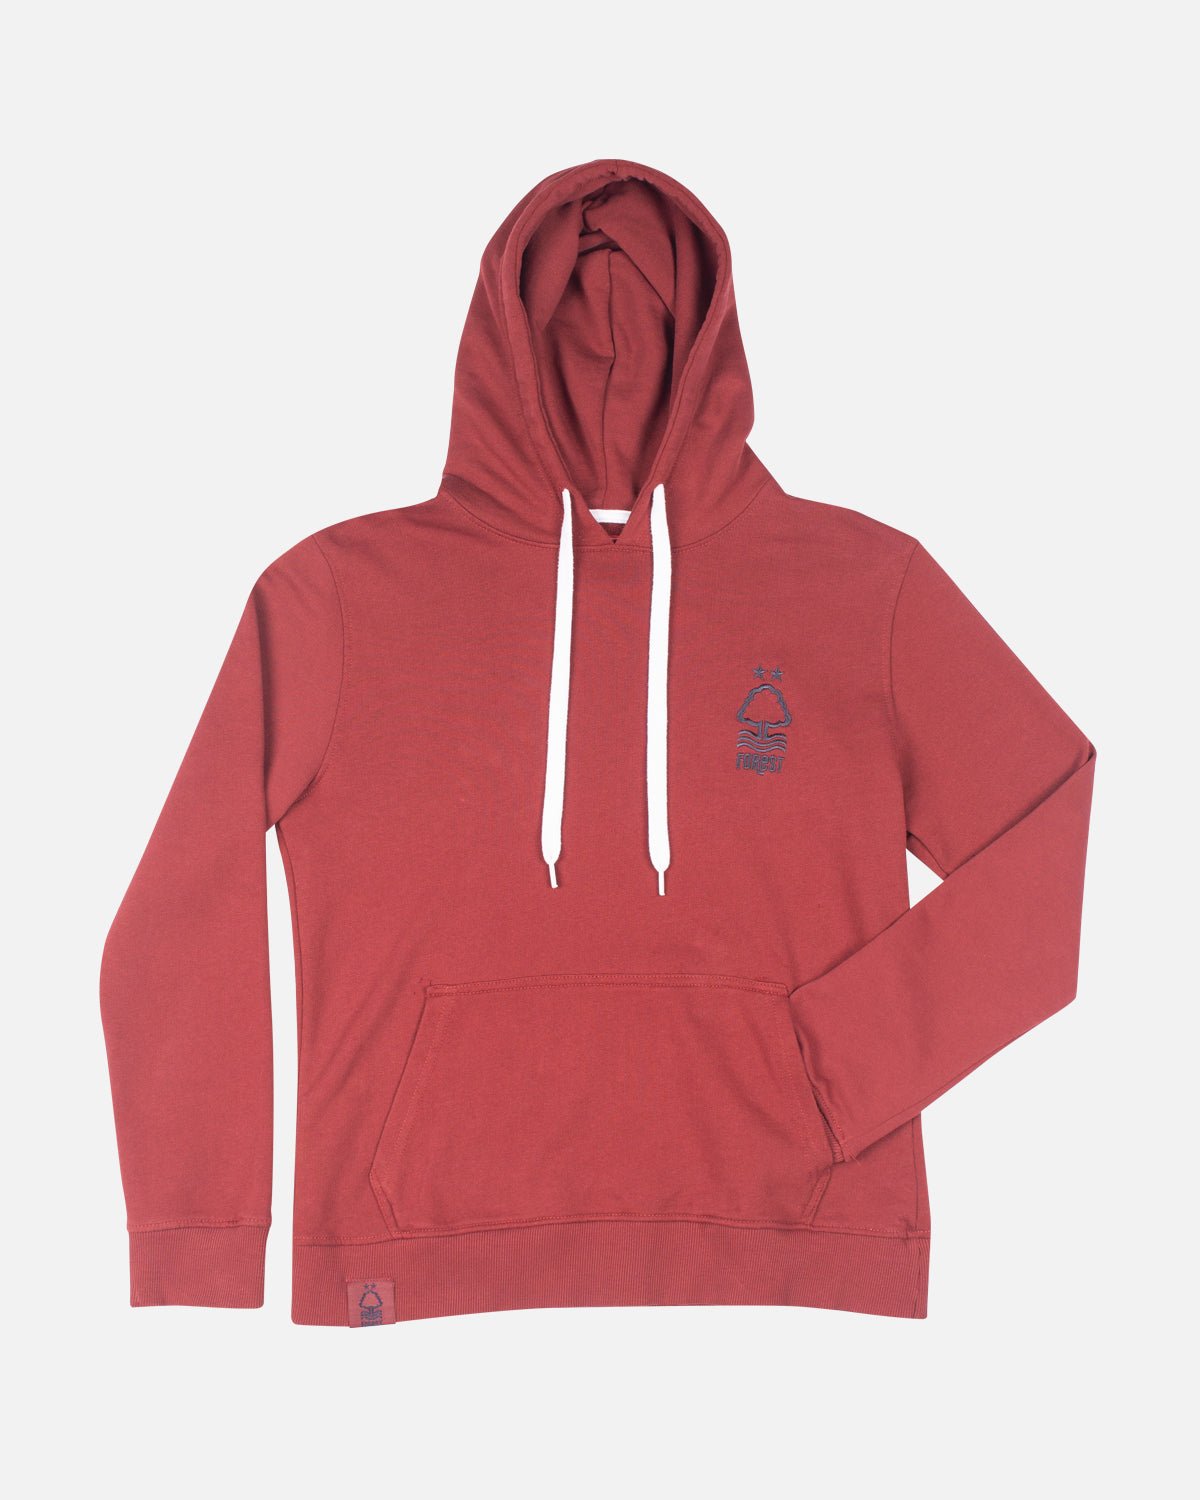 NFFC Womens Dark Red Overhead Hoodie - Nottingham Forest FC